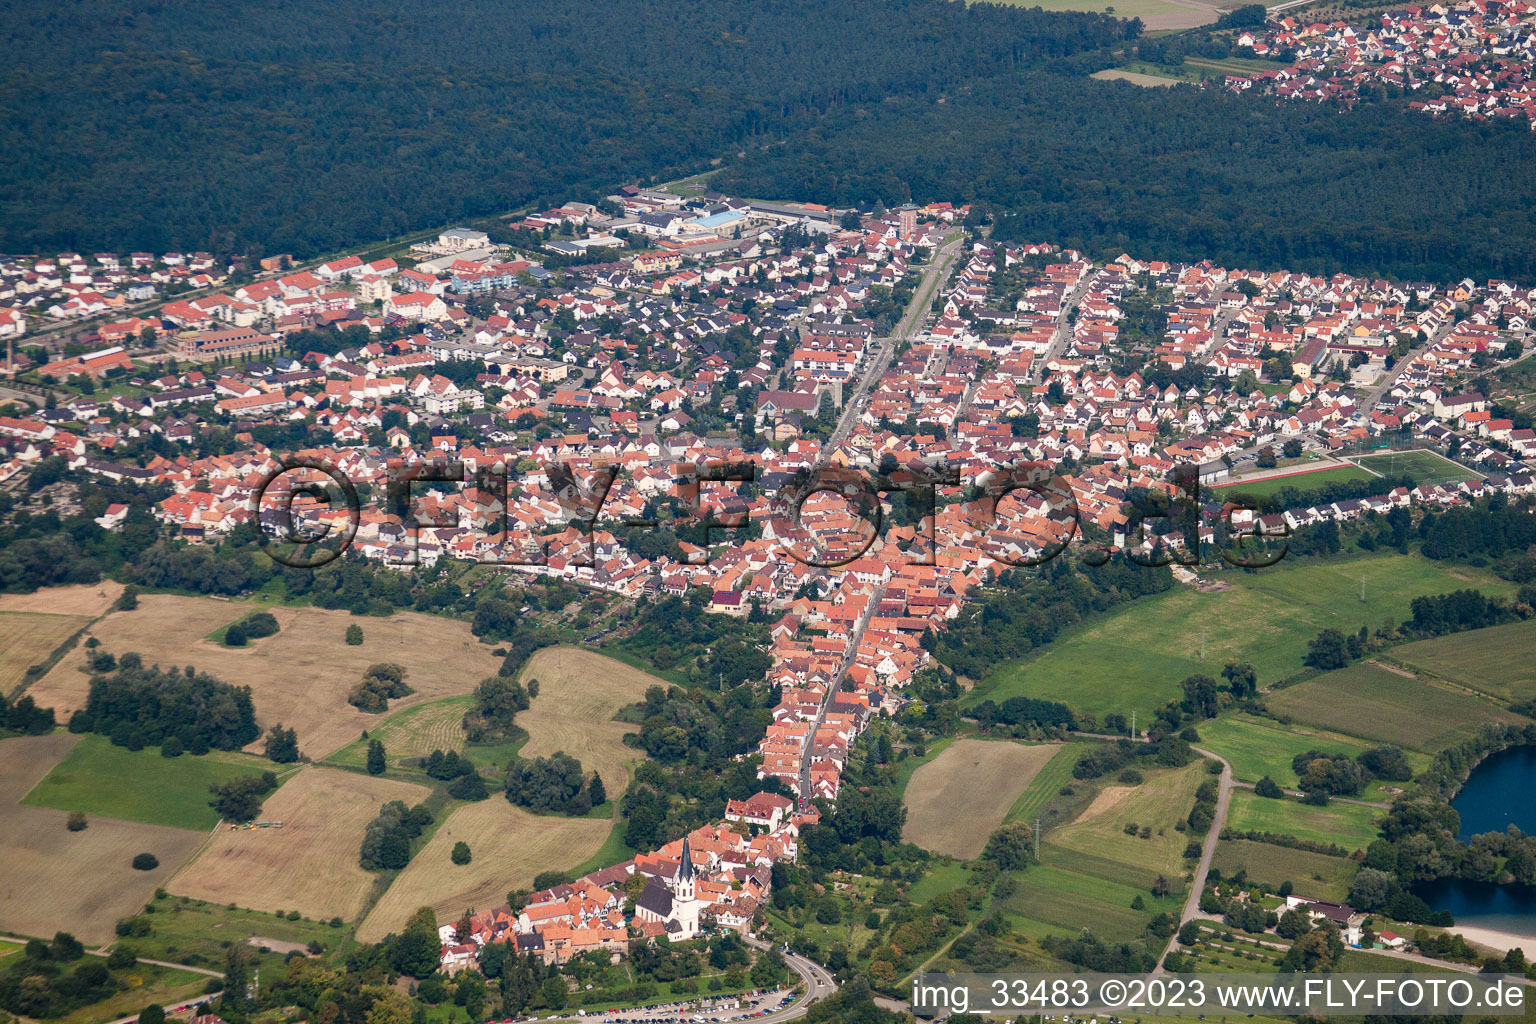 Jockgri in Jockgrim in the state Rhineland-Palatinate, Germany from above